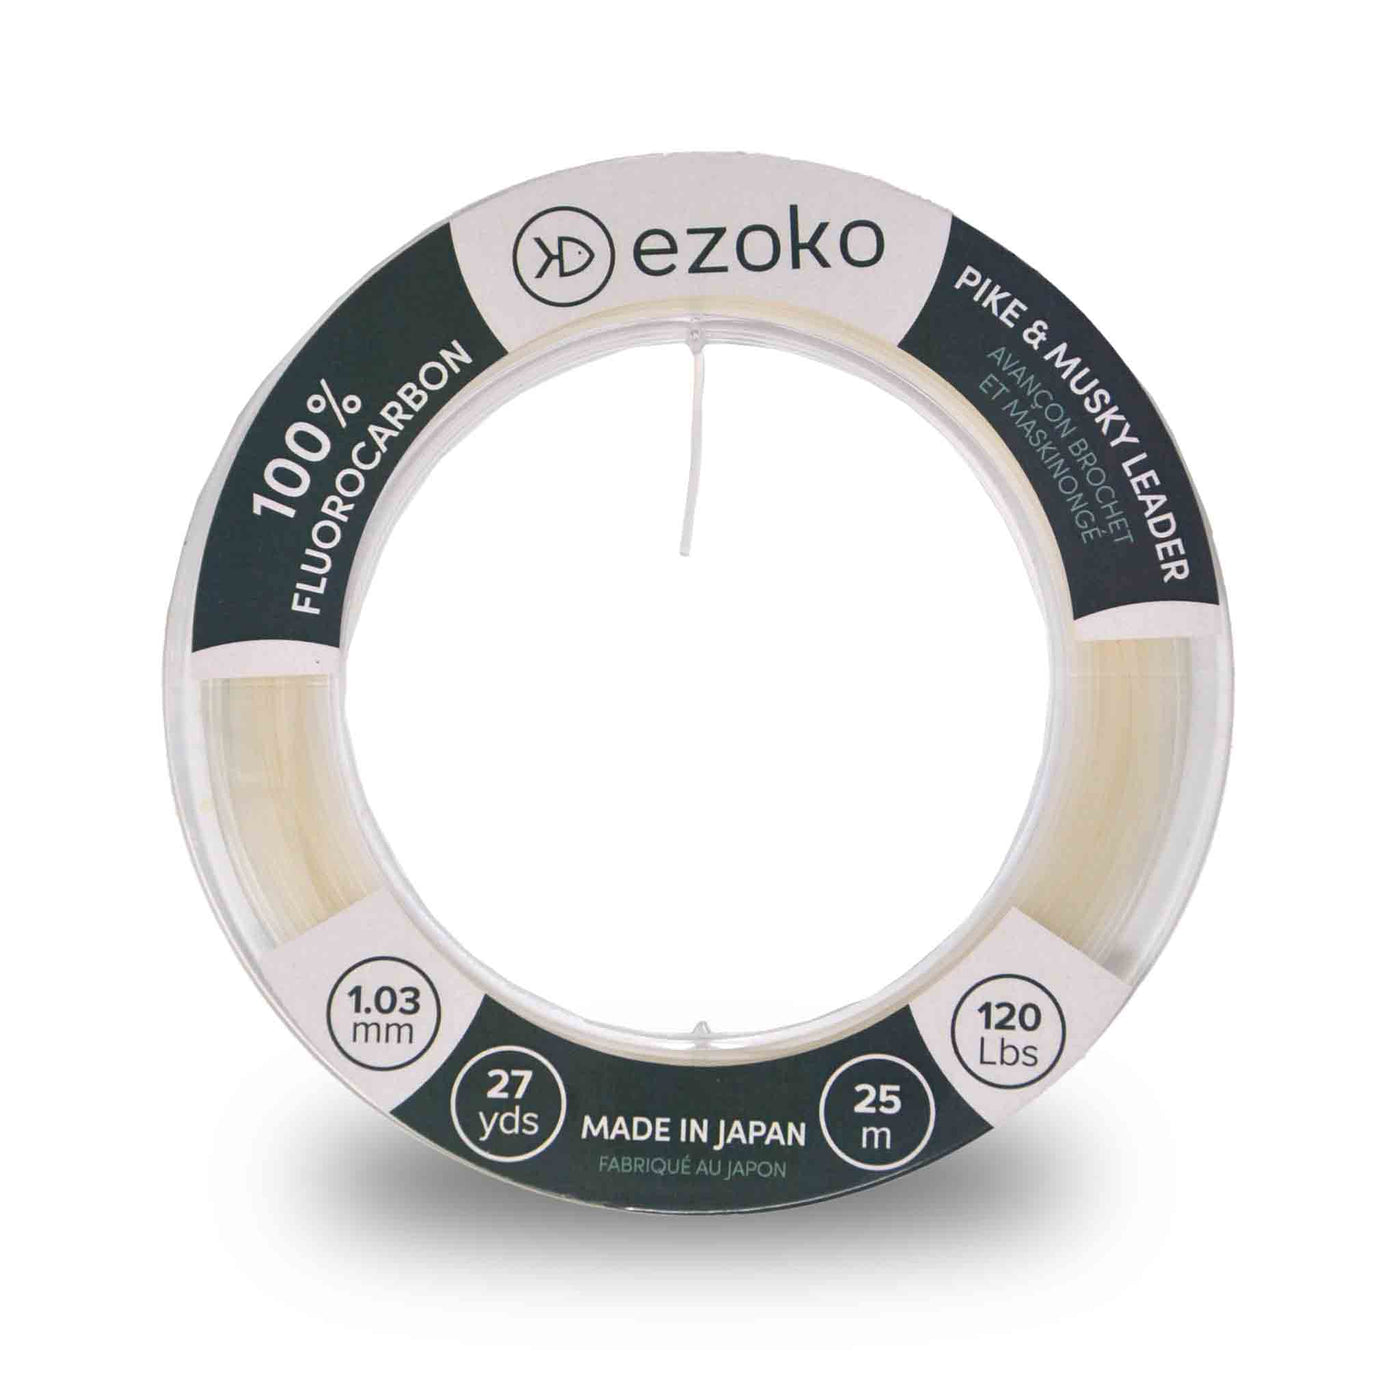 Face view of a Spool of EZOKO 120 Lbs fluorocarbon leader material